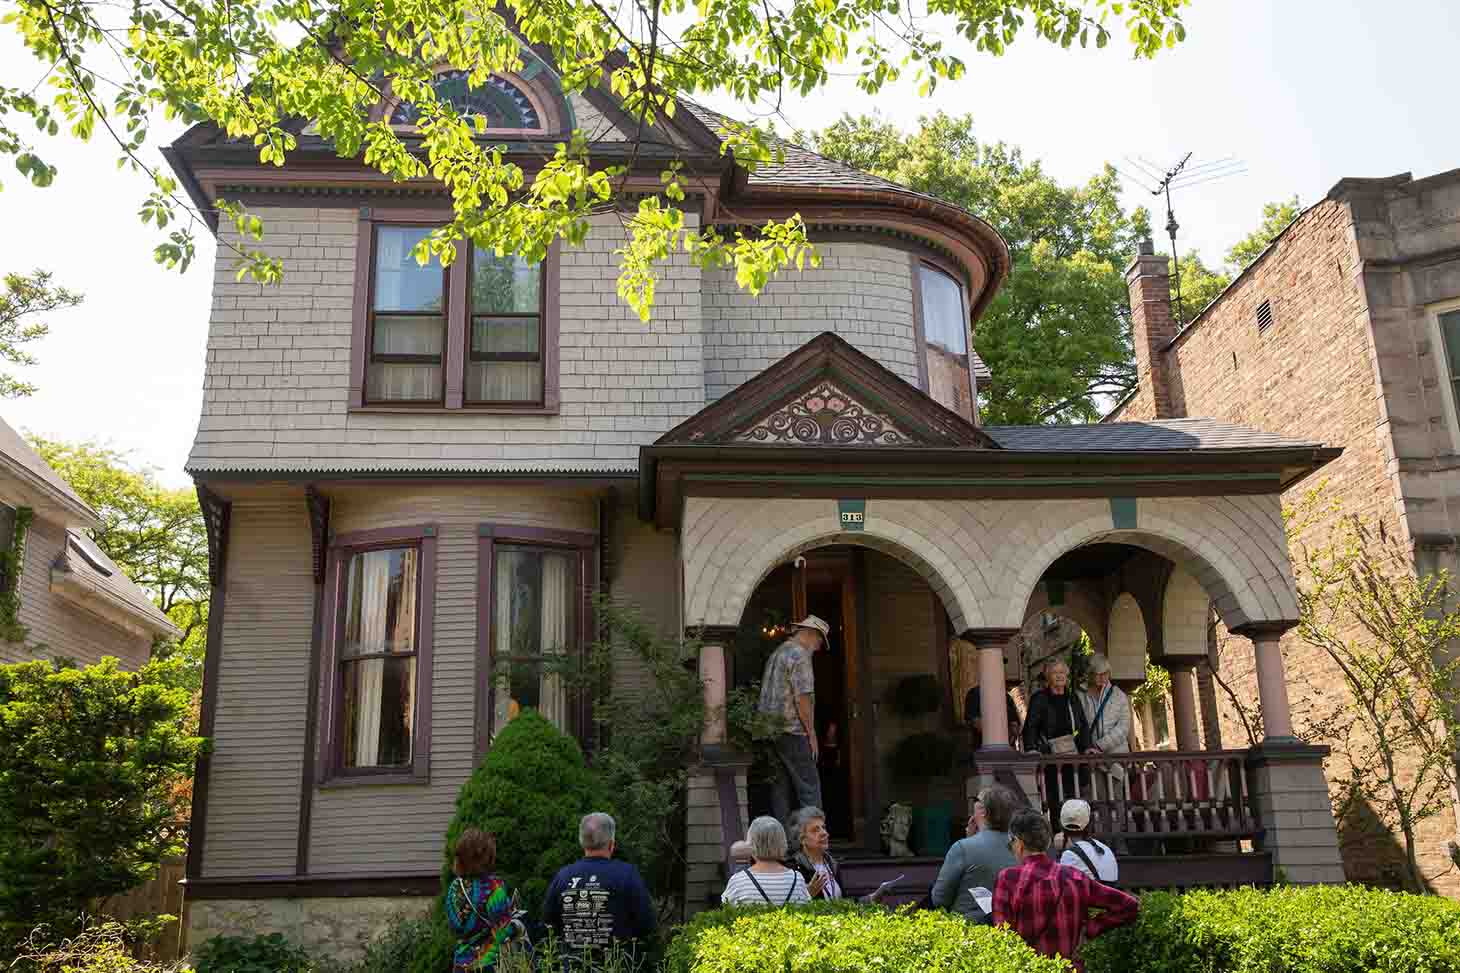 The Victorian Queen Anne style Maurice and Lillian Lowrey House